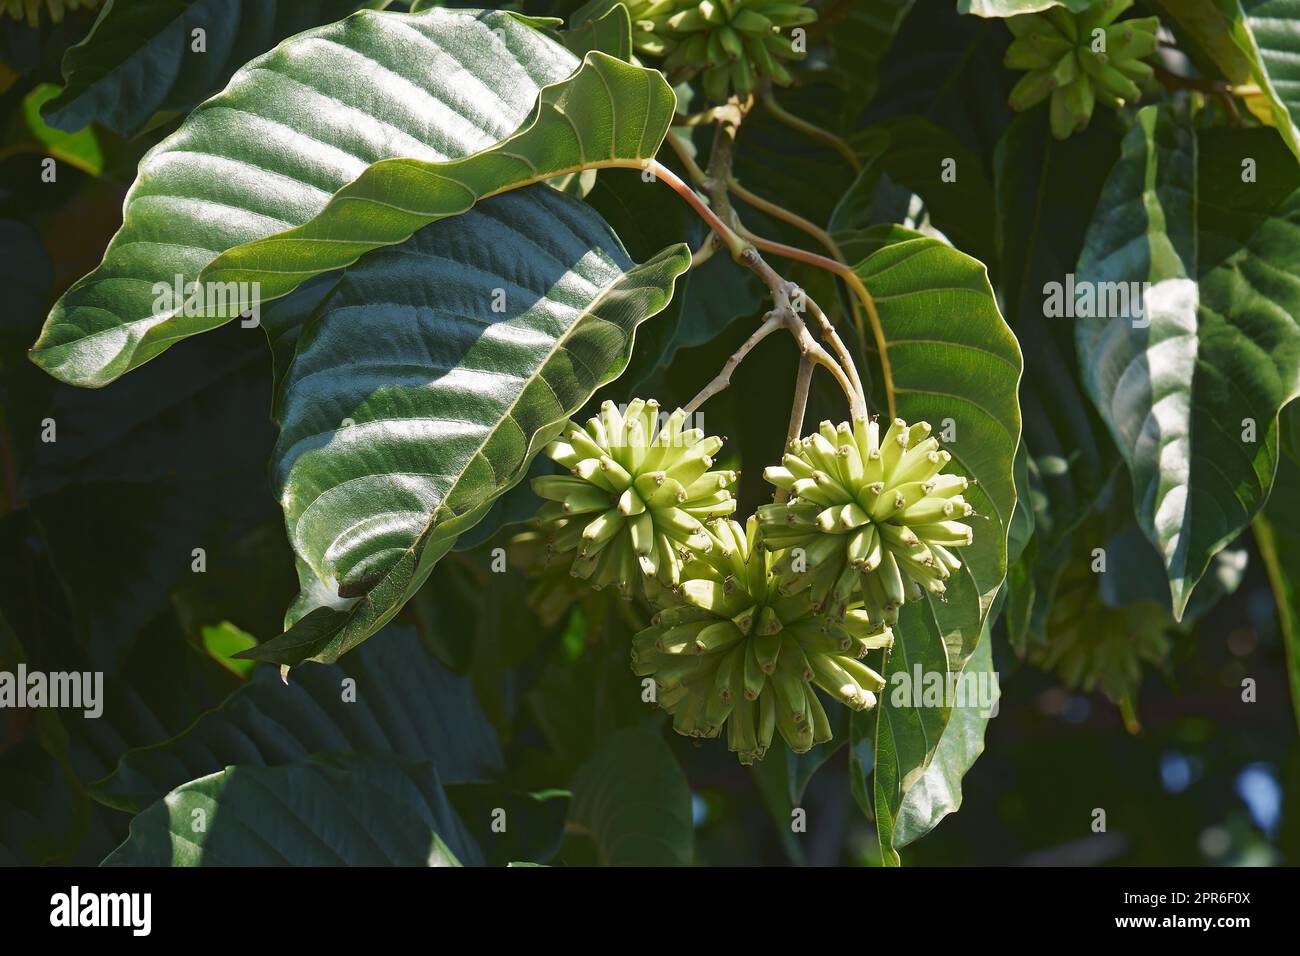 Close-up image of Happy tree with fruits Stock Photo